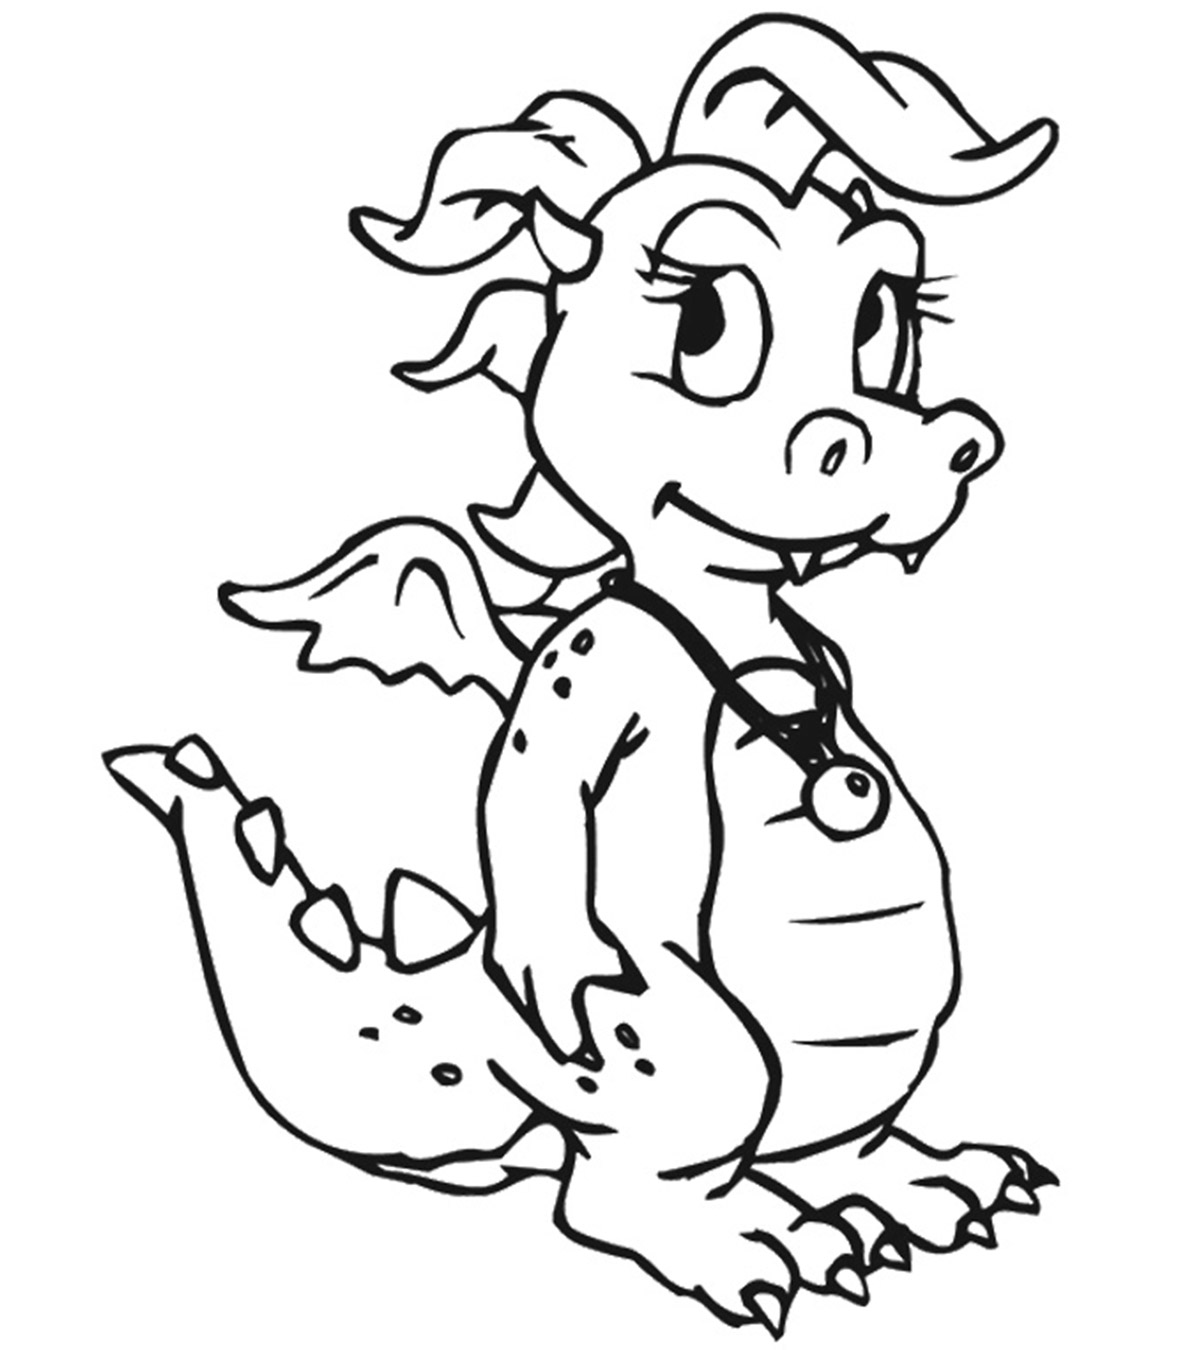 25 Best Dragon Coloring Pages Your Toddler Will Love To Color_image